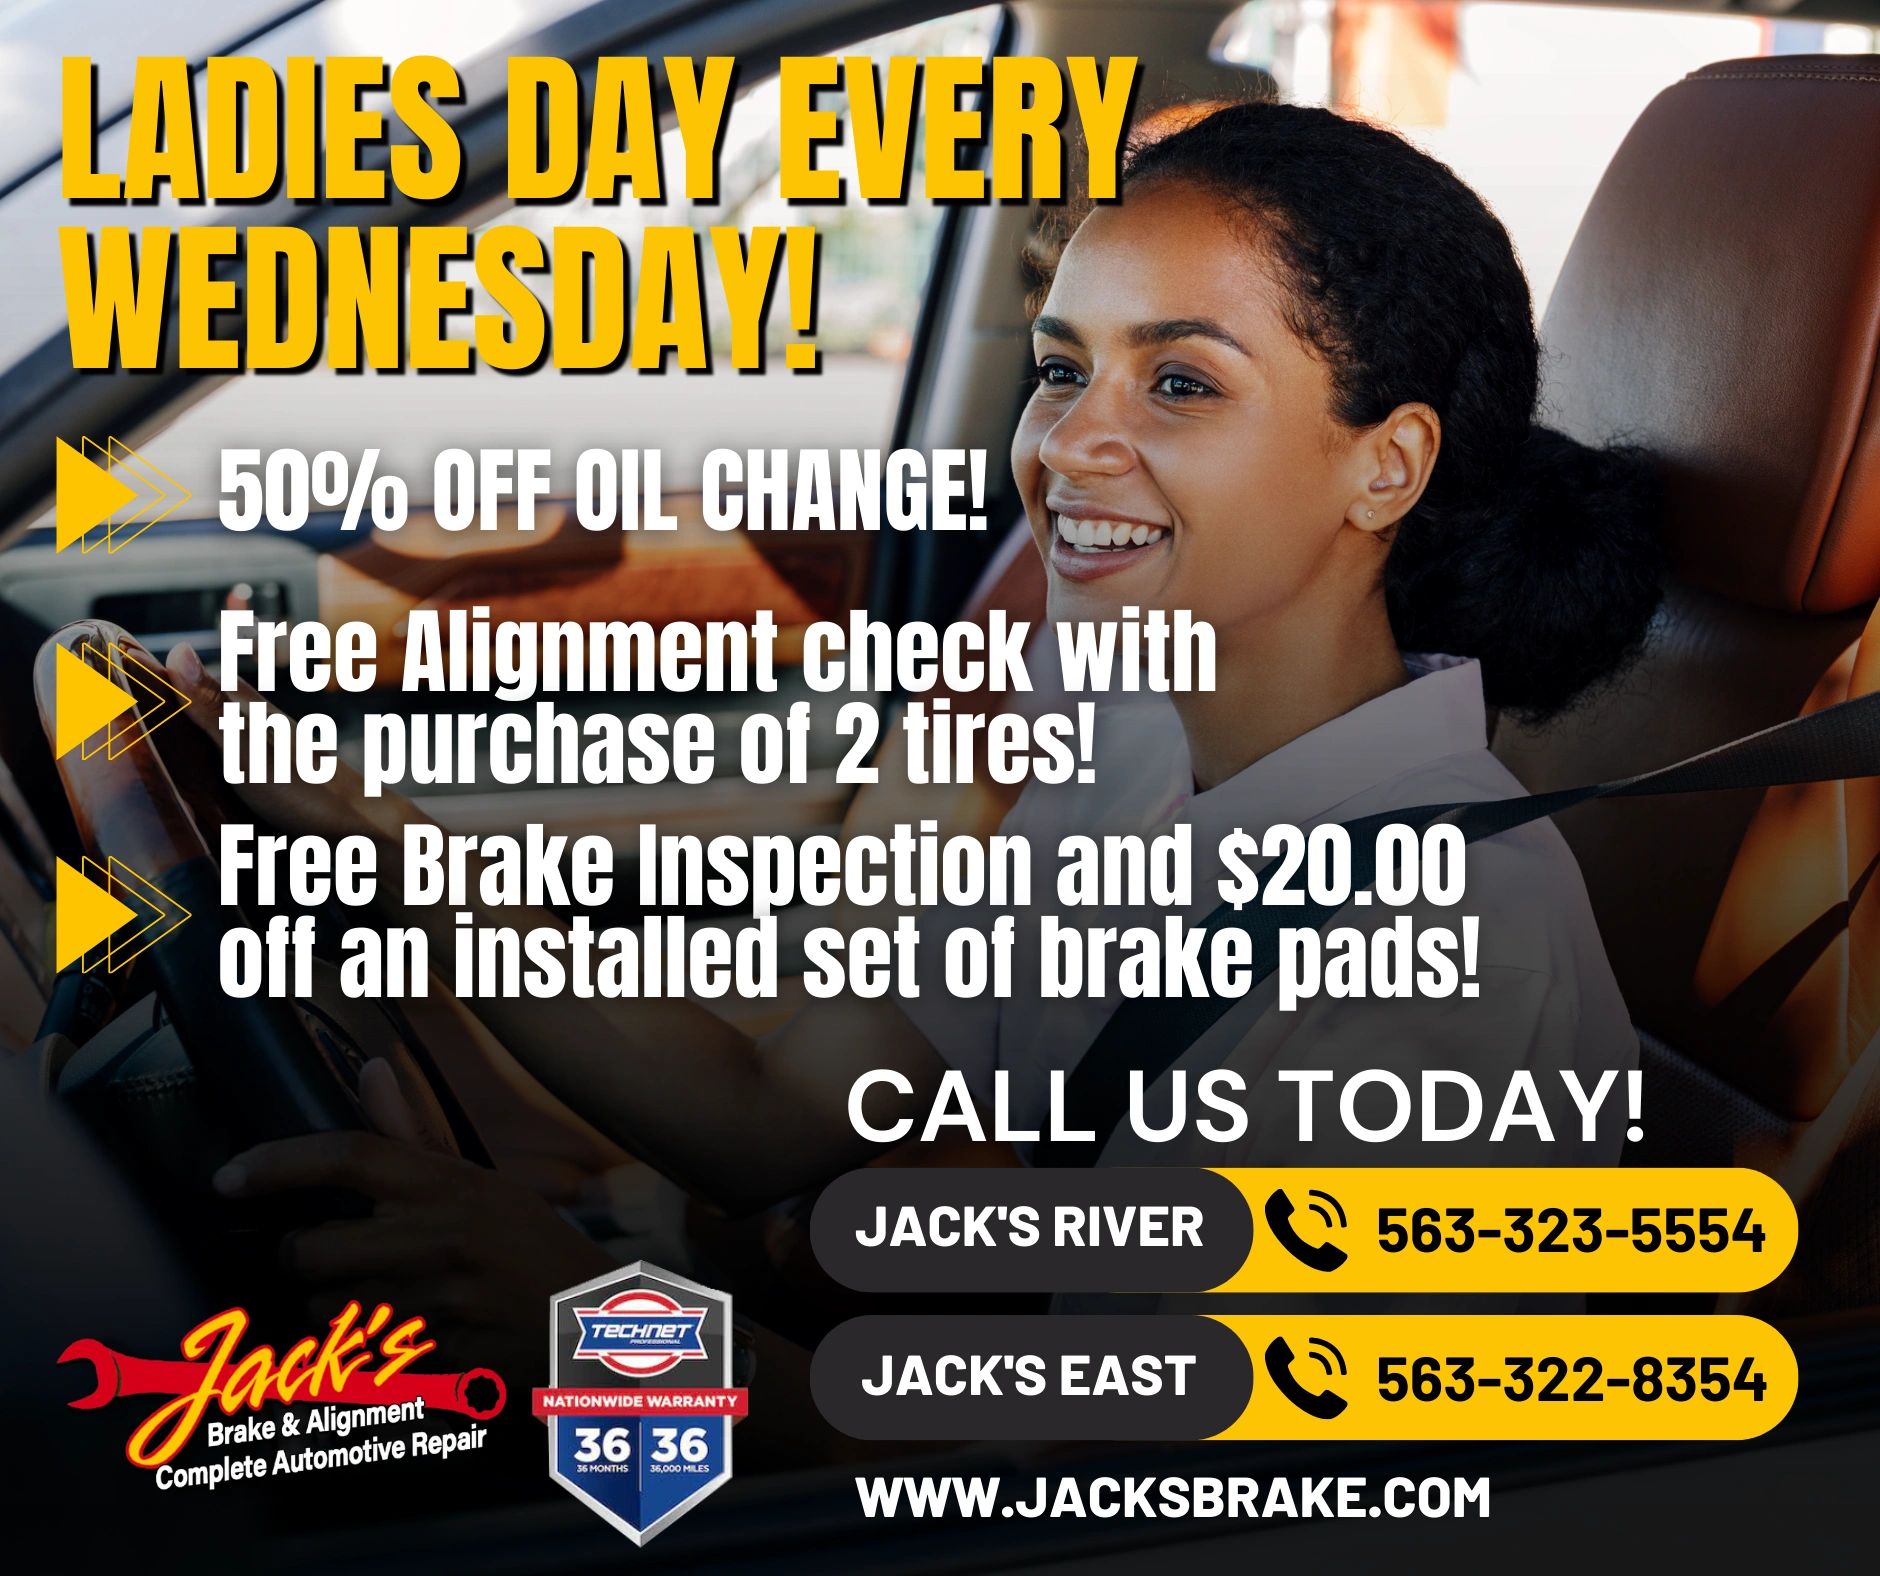 ladies day every Wedensday with exclusive savings only at jacks brake & alignment